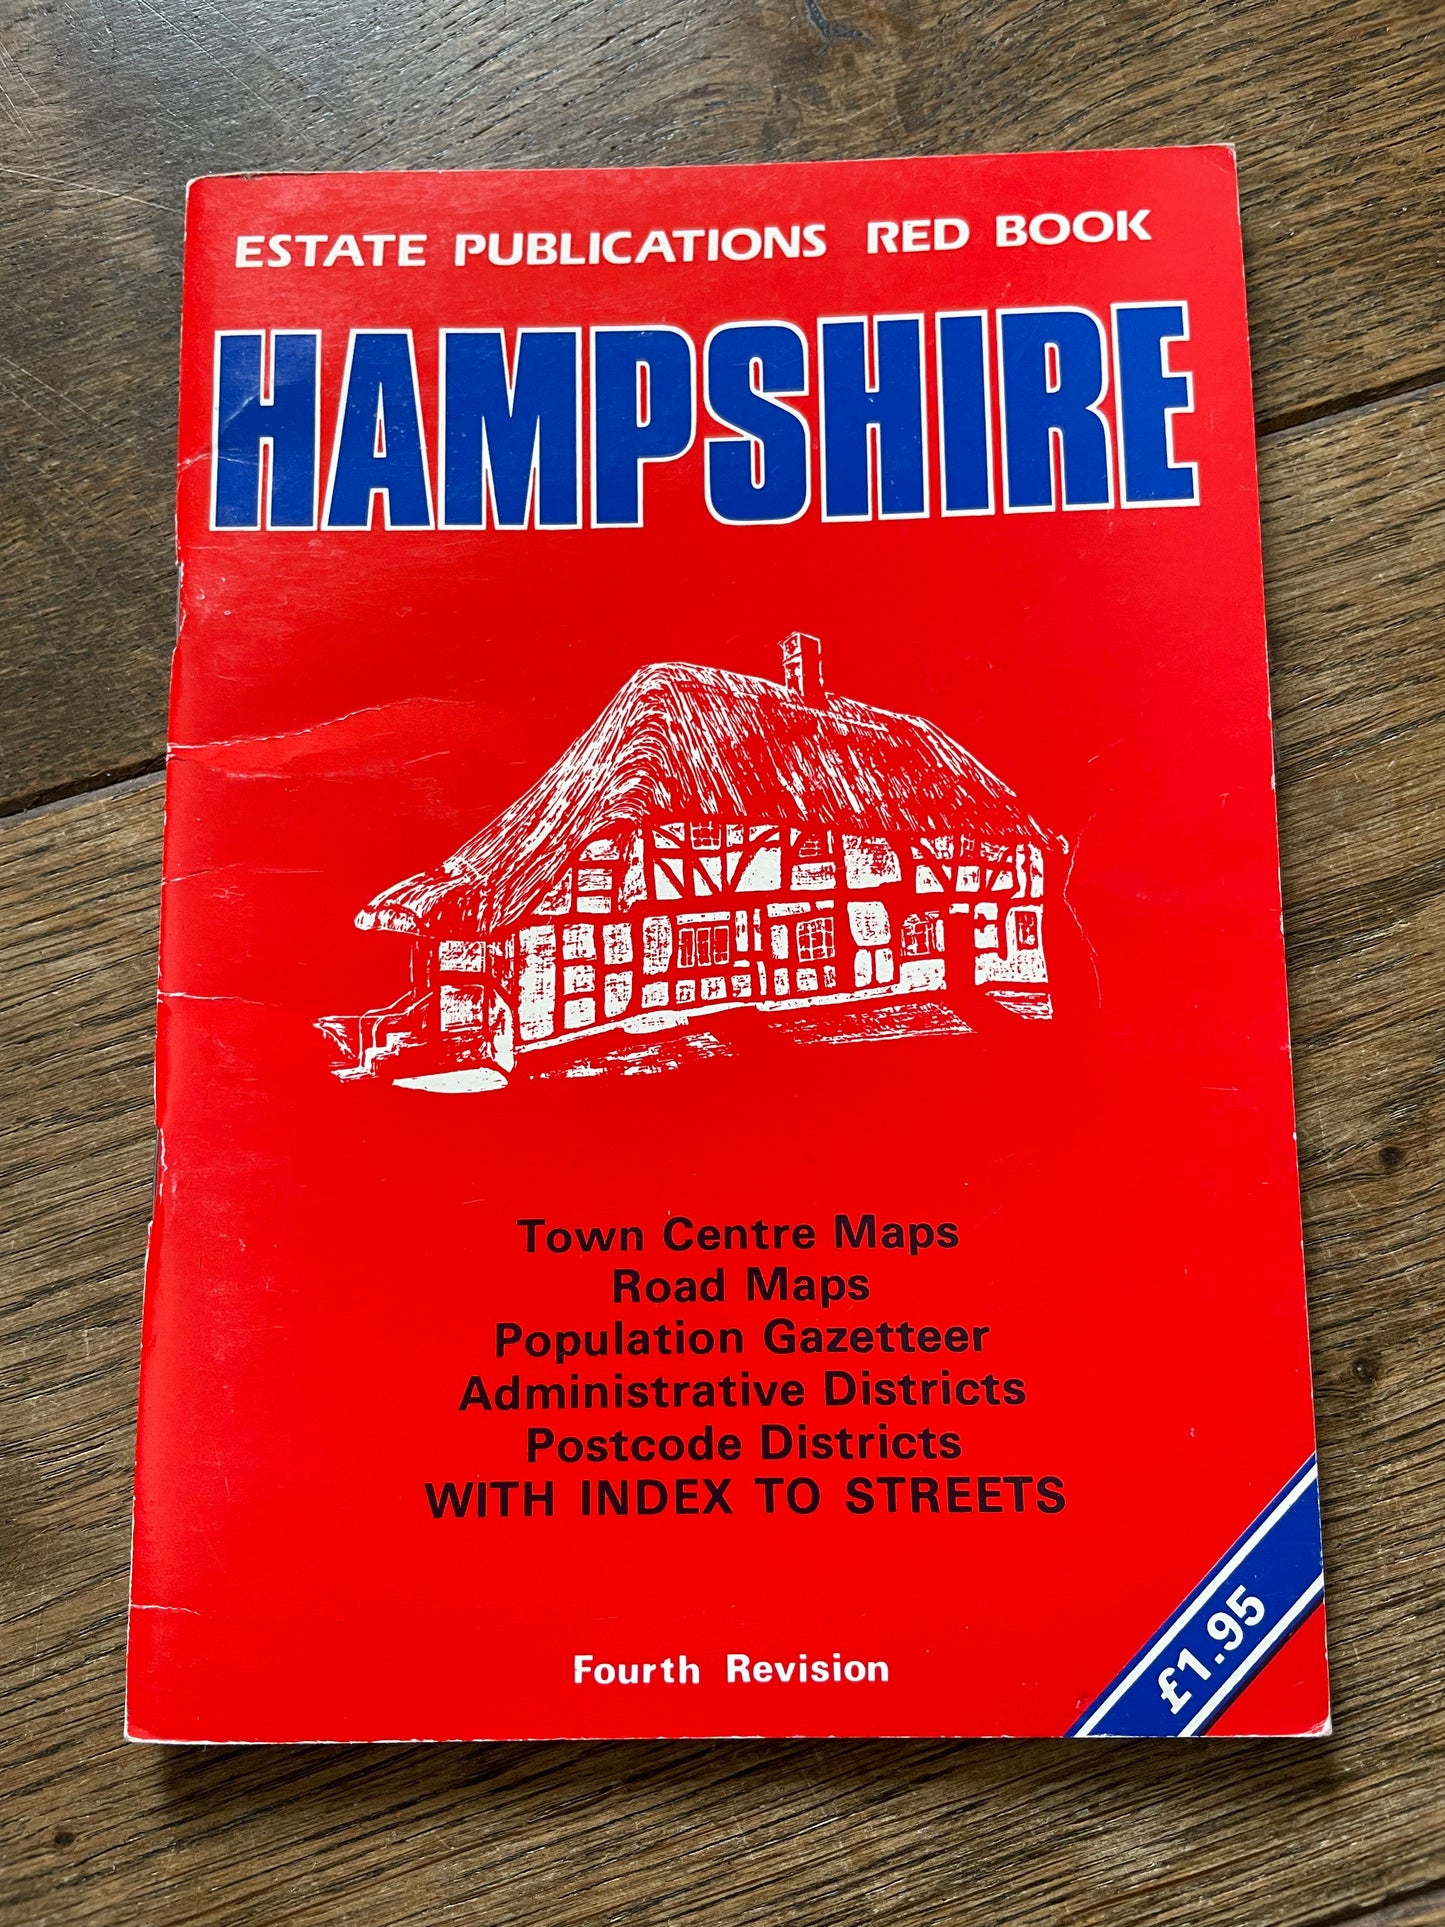 Estate Publications Red Book Map of Hampshire 4th Edition